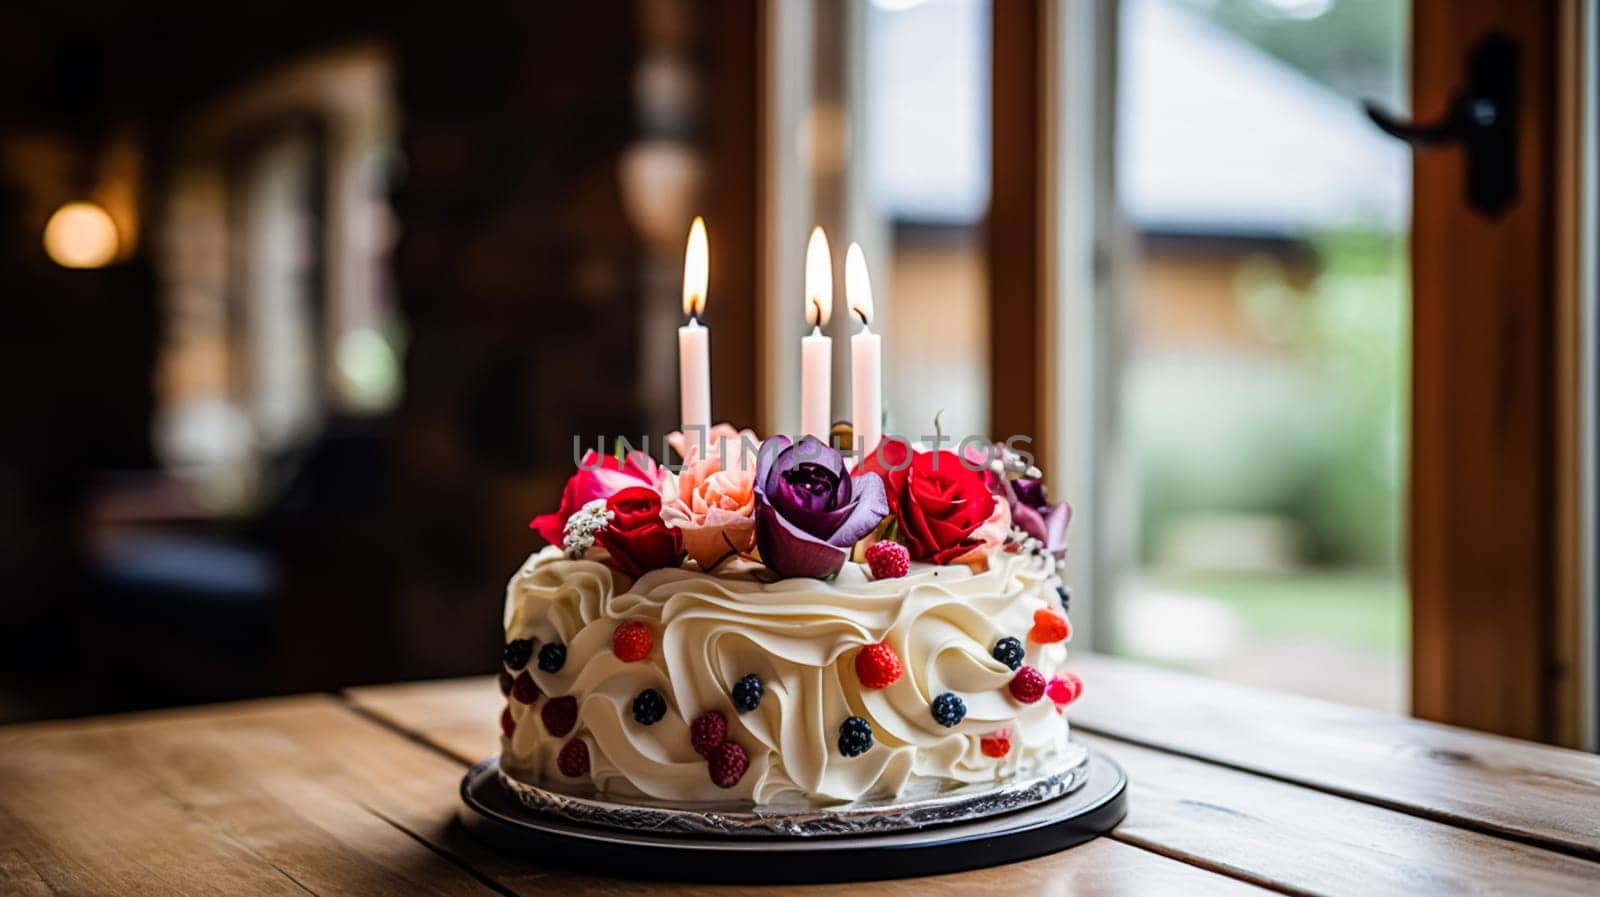 Homemade birthday cake in the English countryside house, cottage kitchen food and holiday baking recipe inspiration